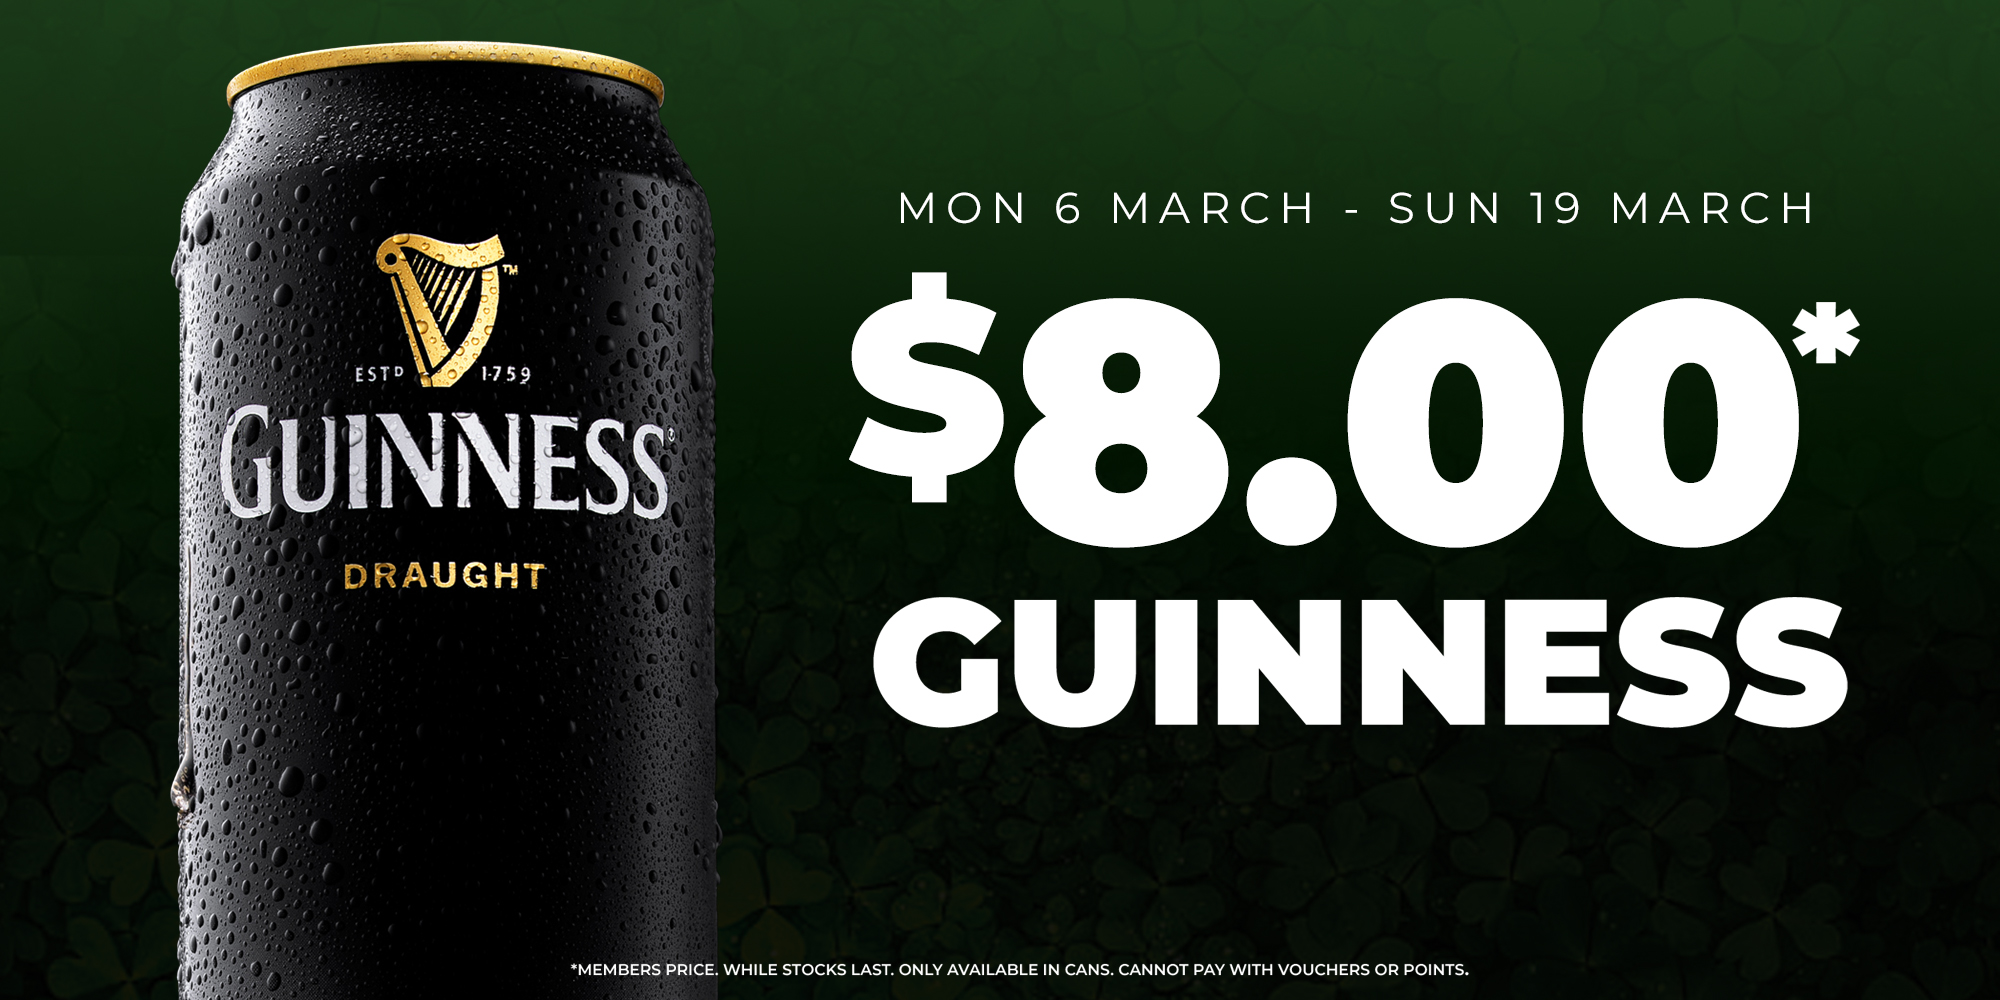 Beverage Promotion. $8 guinness cans. Members price. 6-19 March